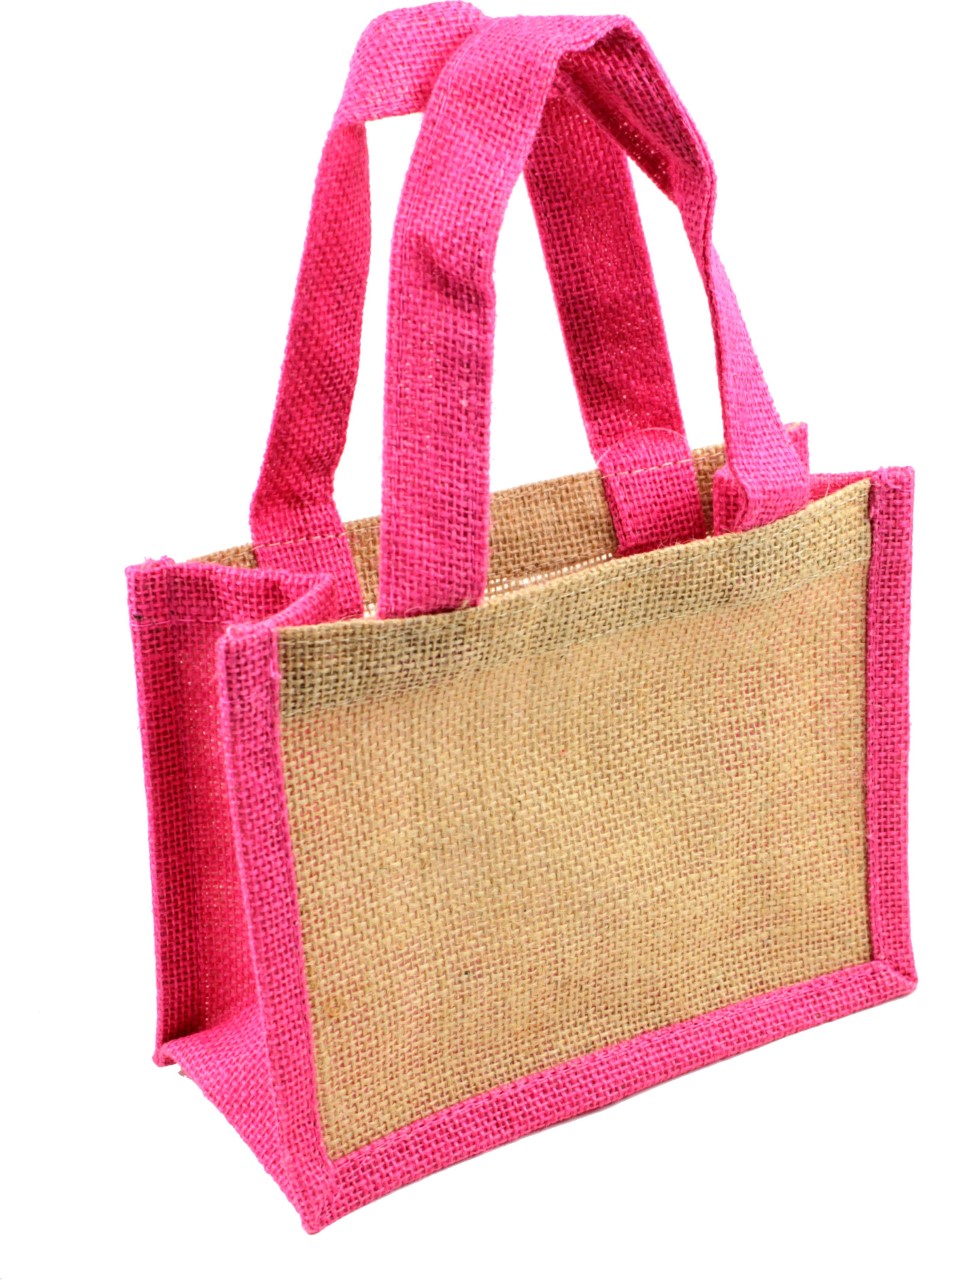 8"W x 6"H x 4"D Burlap Tote With Pink Wall & Handle - Click Image to Close